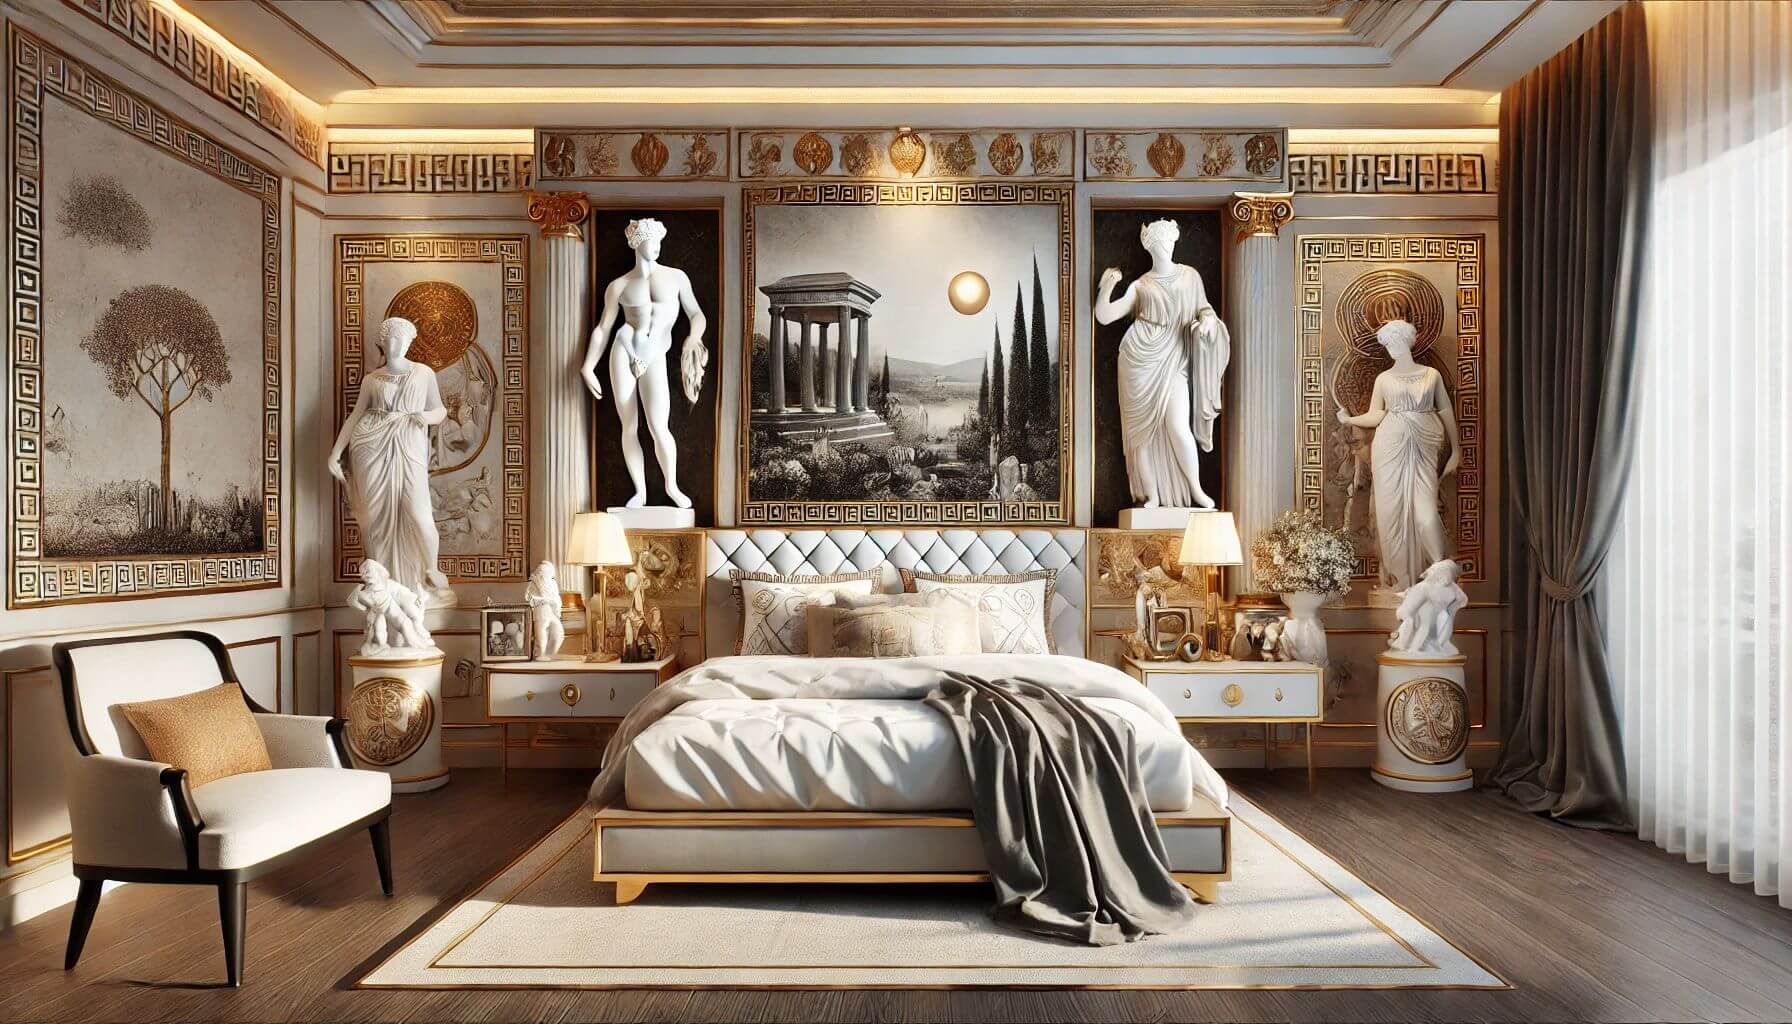 How to Incorporate Greek Art into Your Bedroom Design